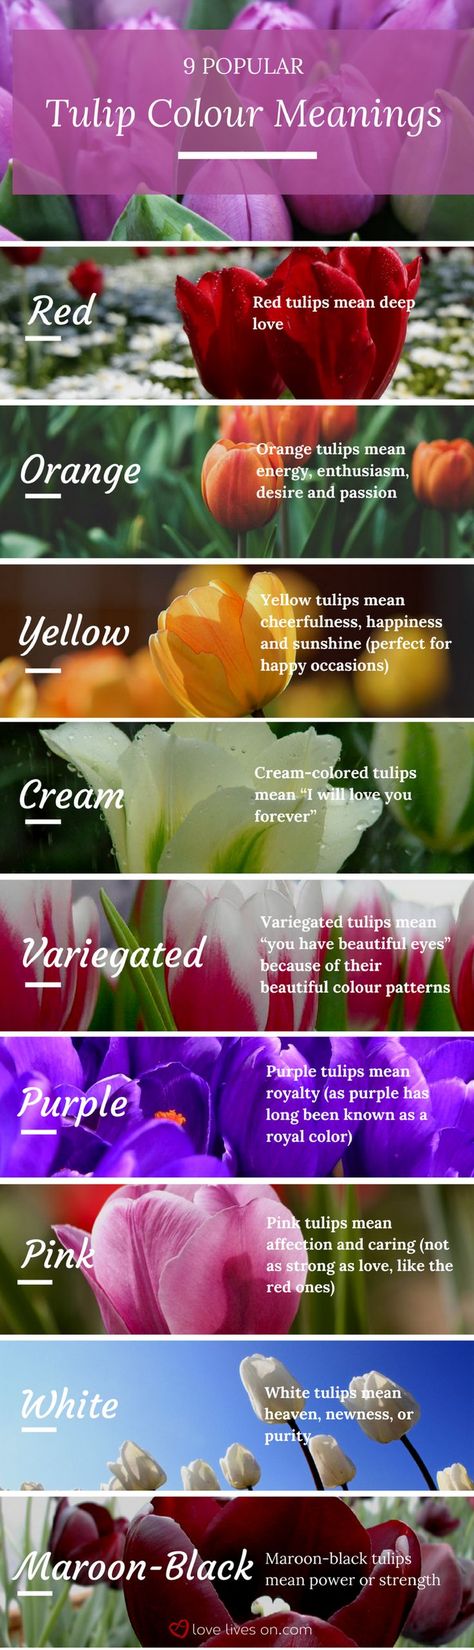 Infographic: 9 Popular Tulip Colour Meanings. Learn tulip colour meanings so you can create a meaningful sympathy or funeral arrangement. Tulips, Gardening, Inspiration, Floral, Meaning Of Tulips, Types Of Tulips, Tulips Meaning, Tulip Colors, Tulips Meaning Language Of Flowers